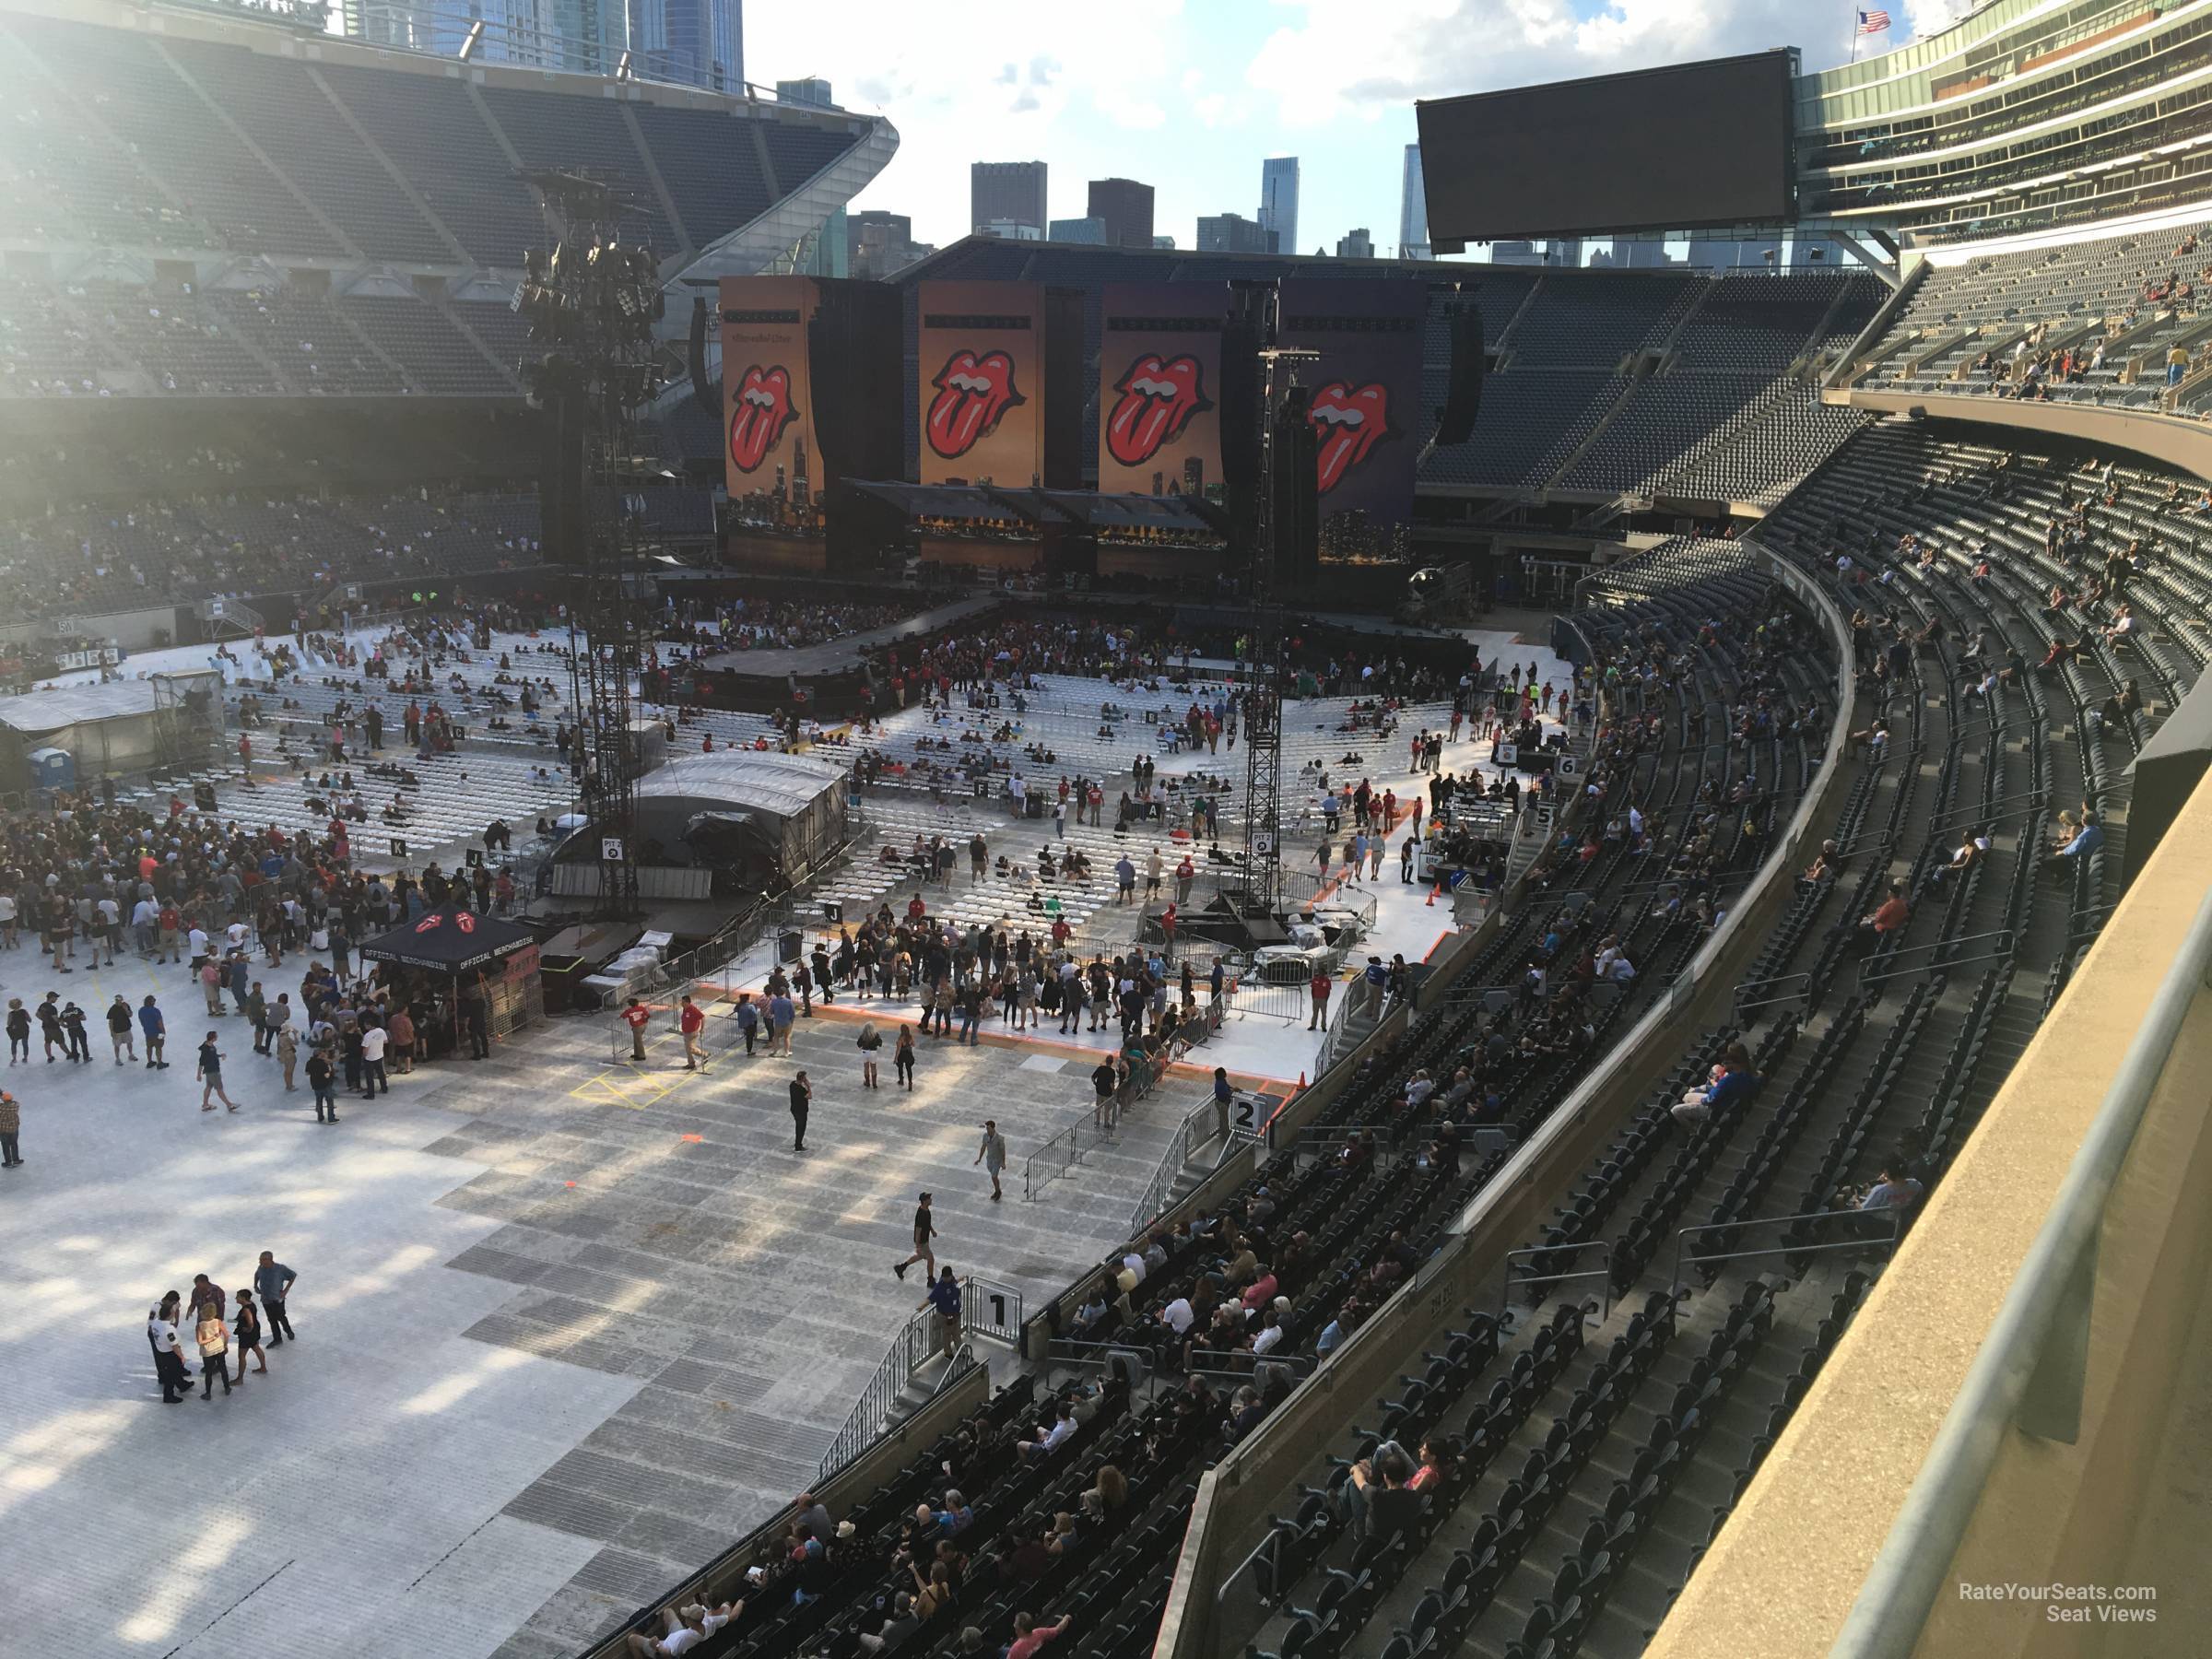 section 315, row 2 seat view  for concert - soldier field